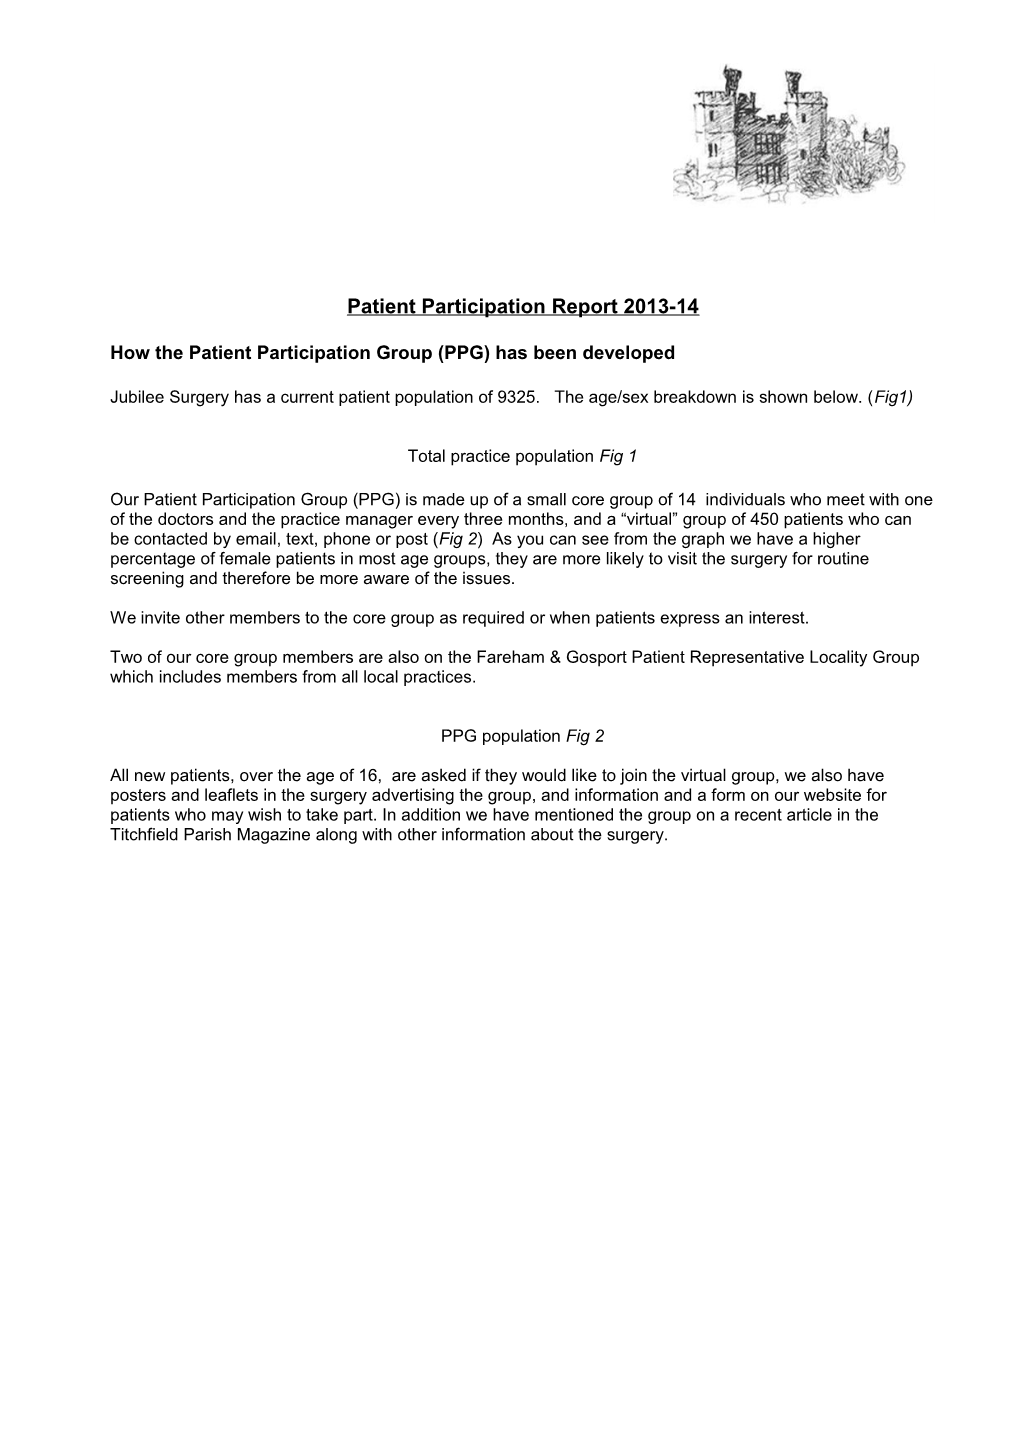 How the Patient Participation Group (PPG) Has Been Developed